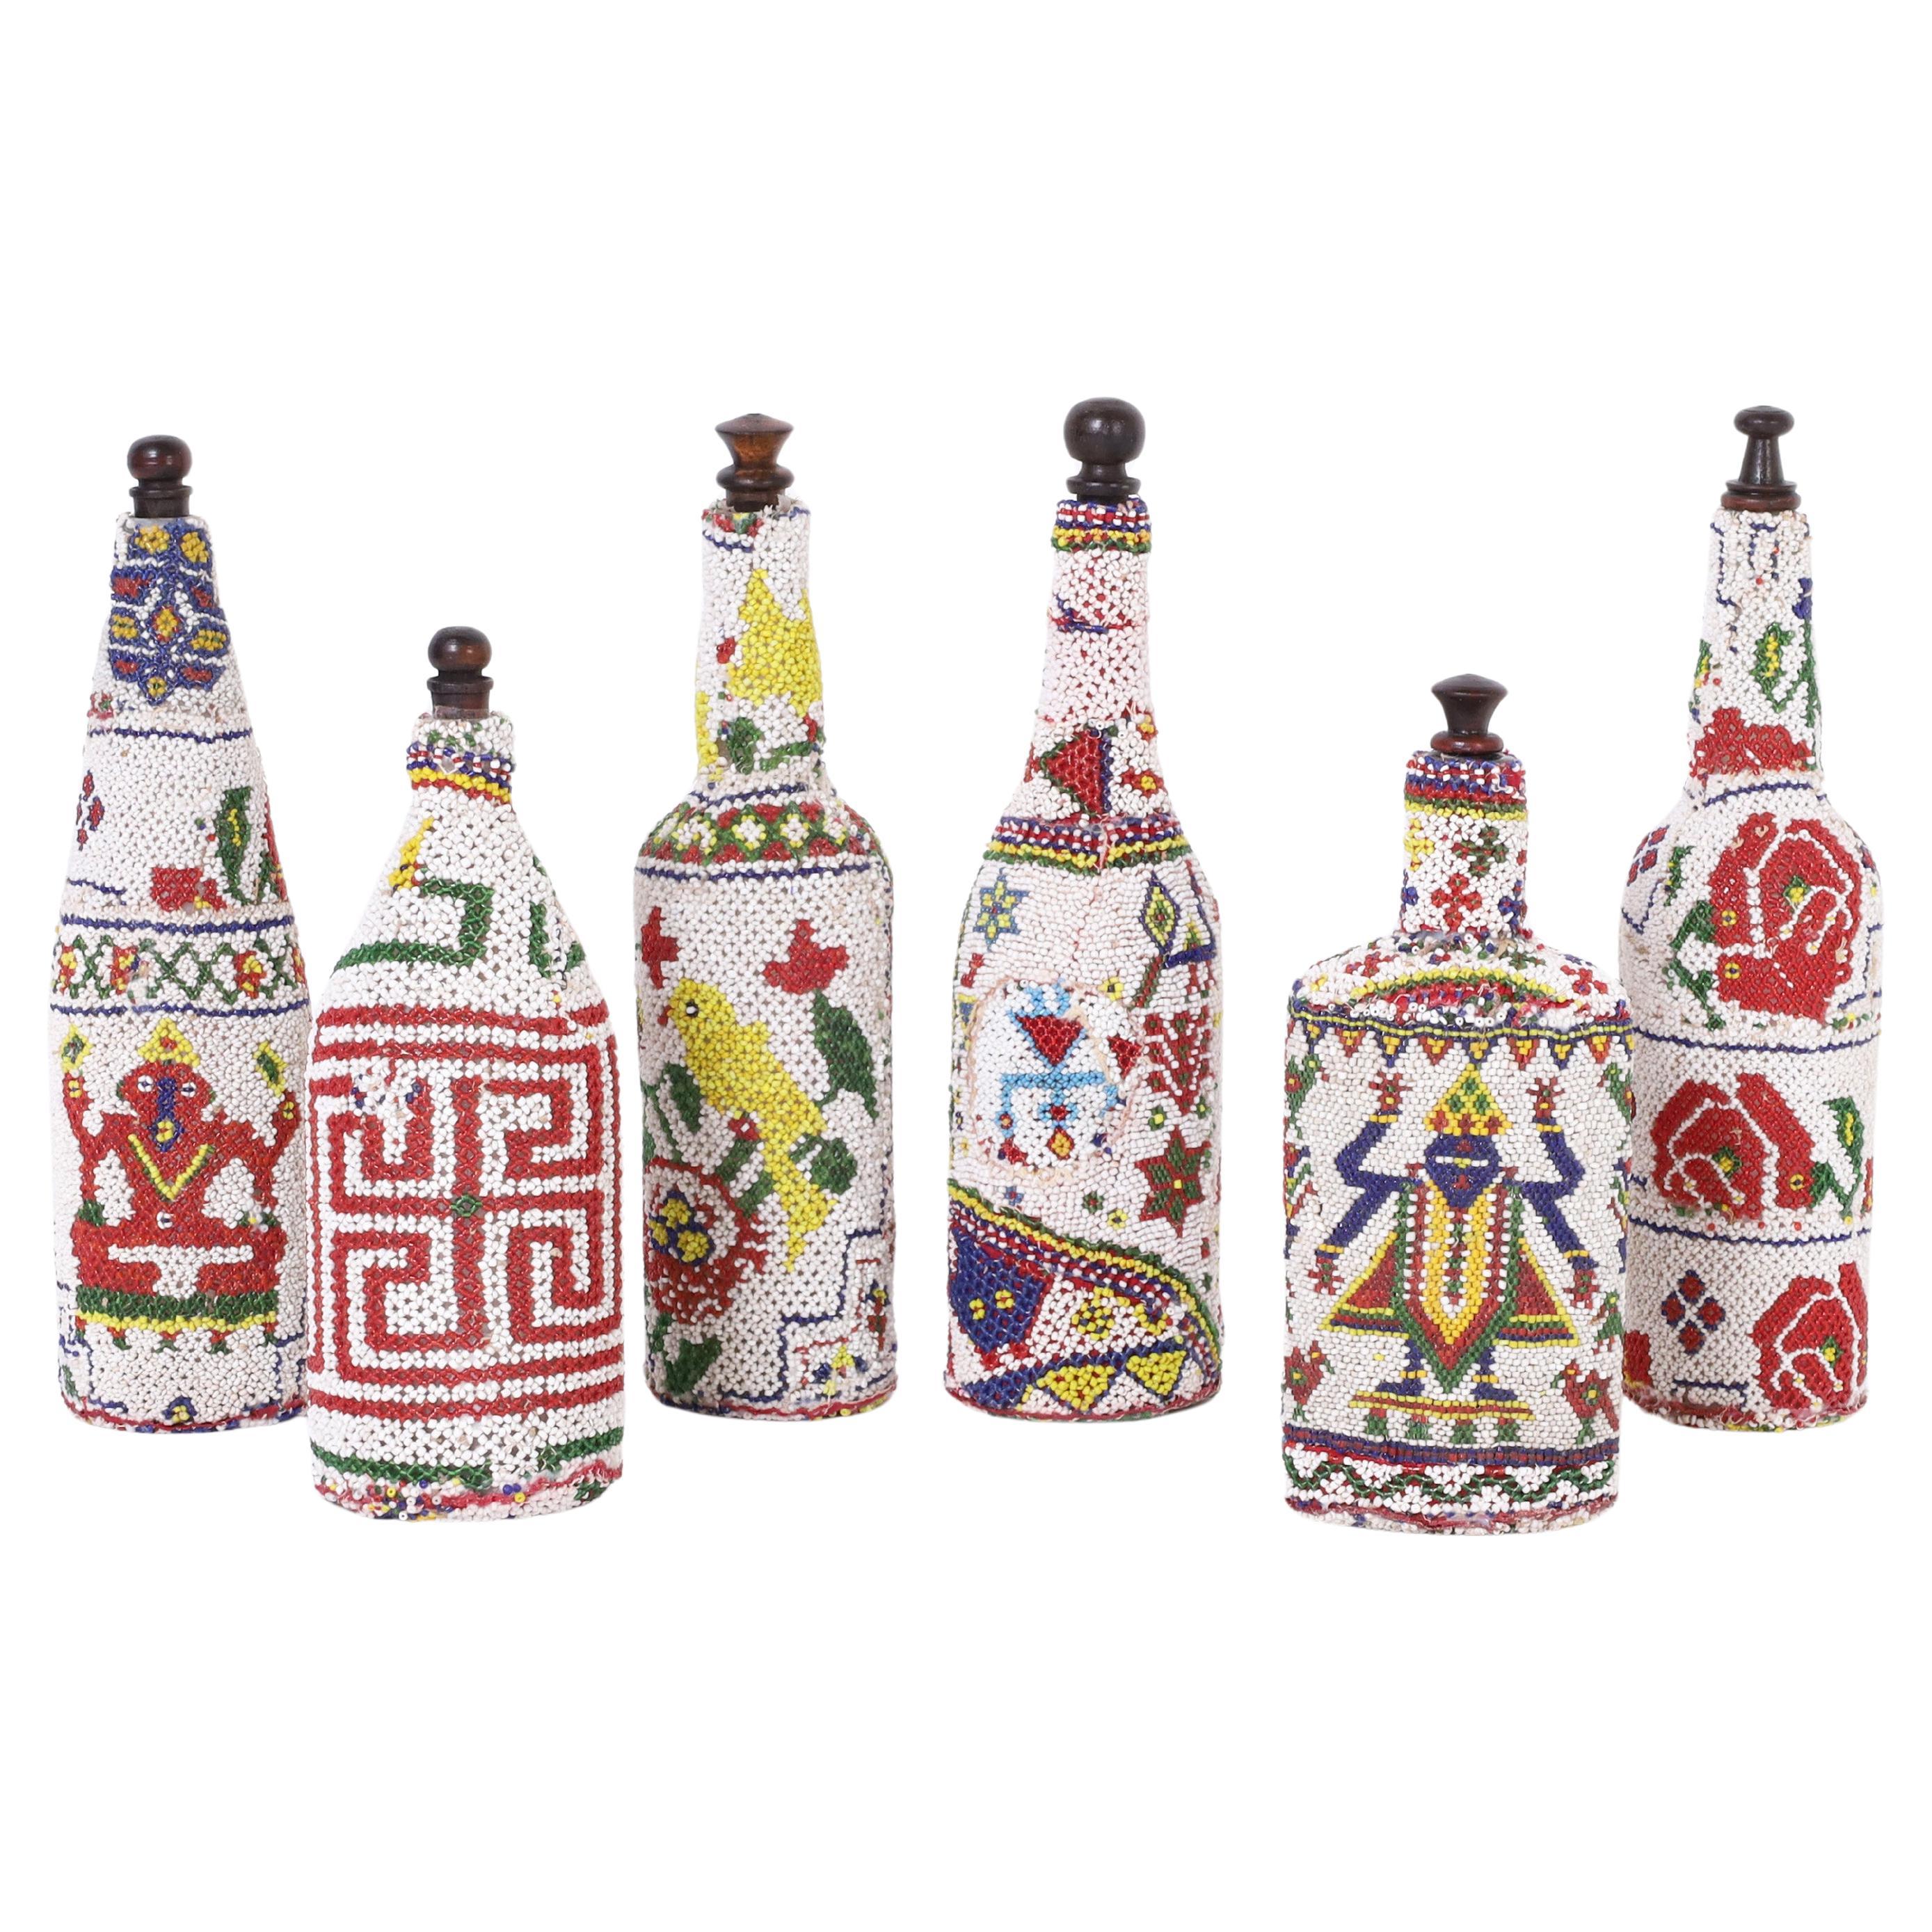 Beads Vases and Vessels